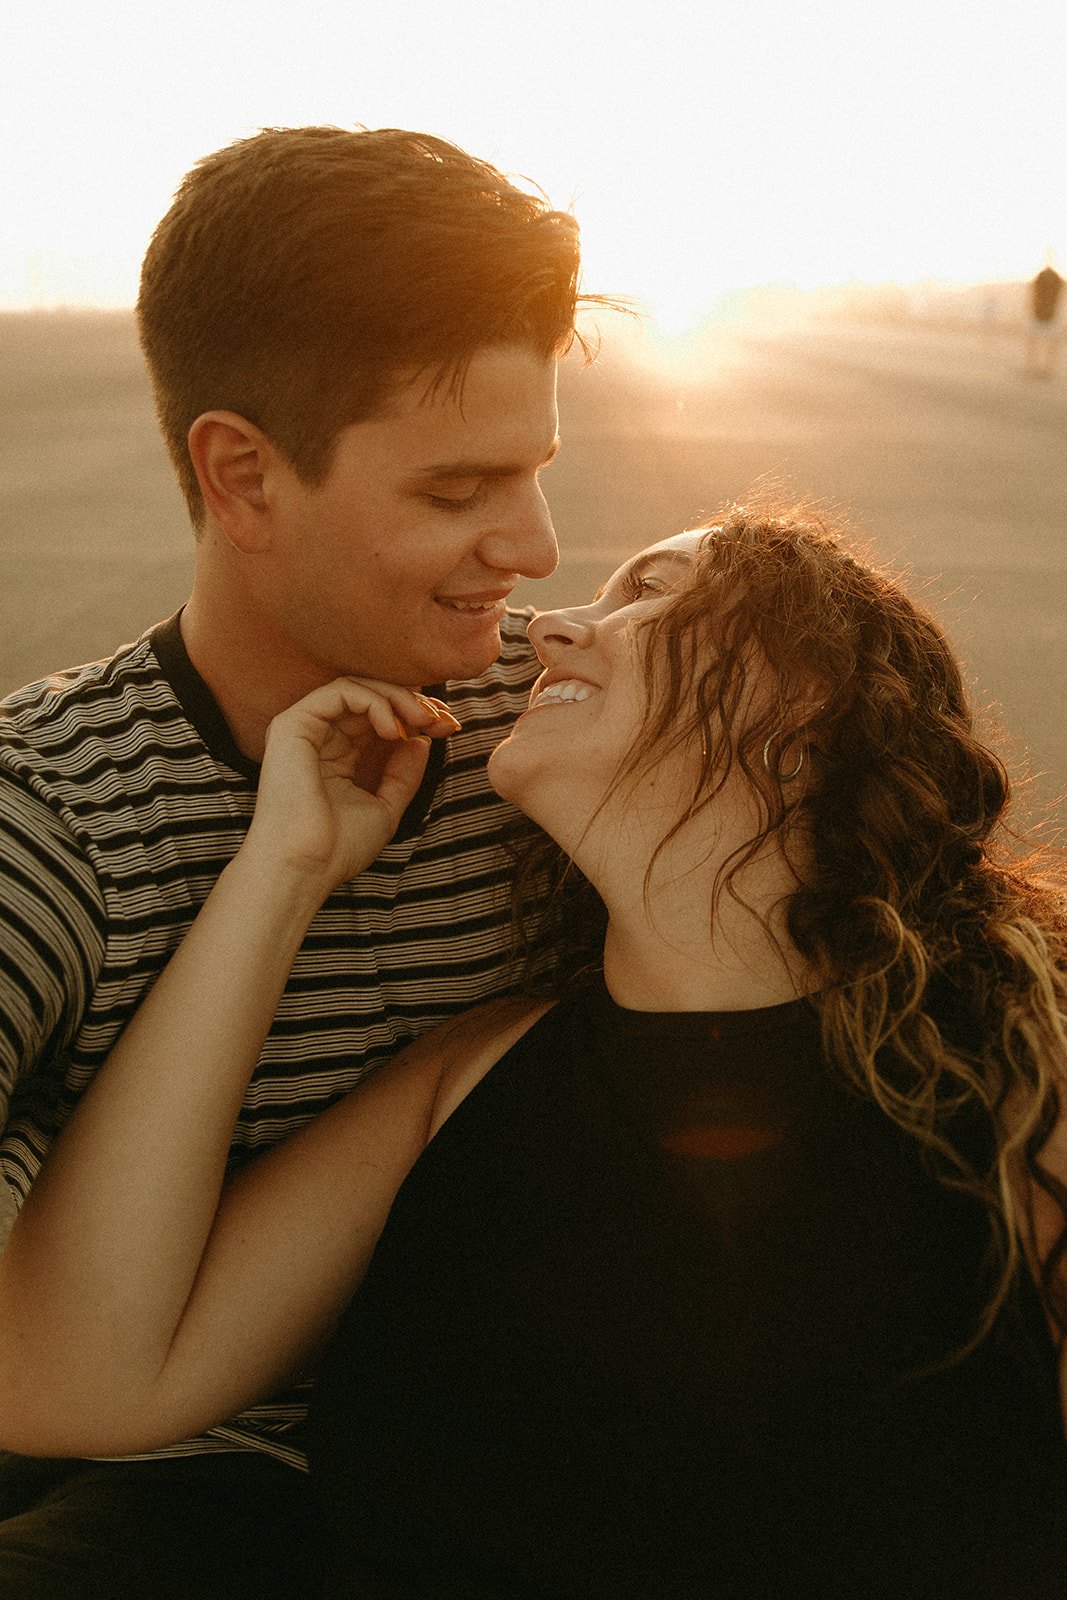 Newport Beach engagement photo session with cute couple during golden hour